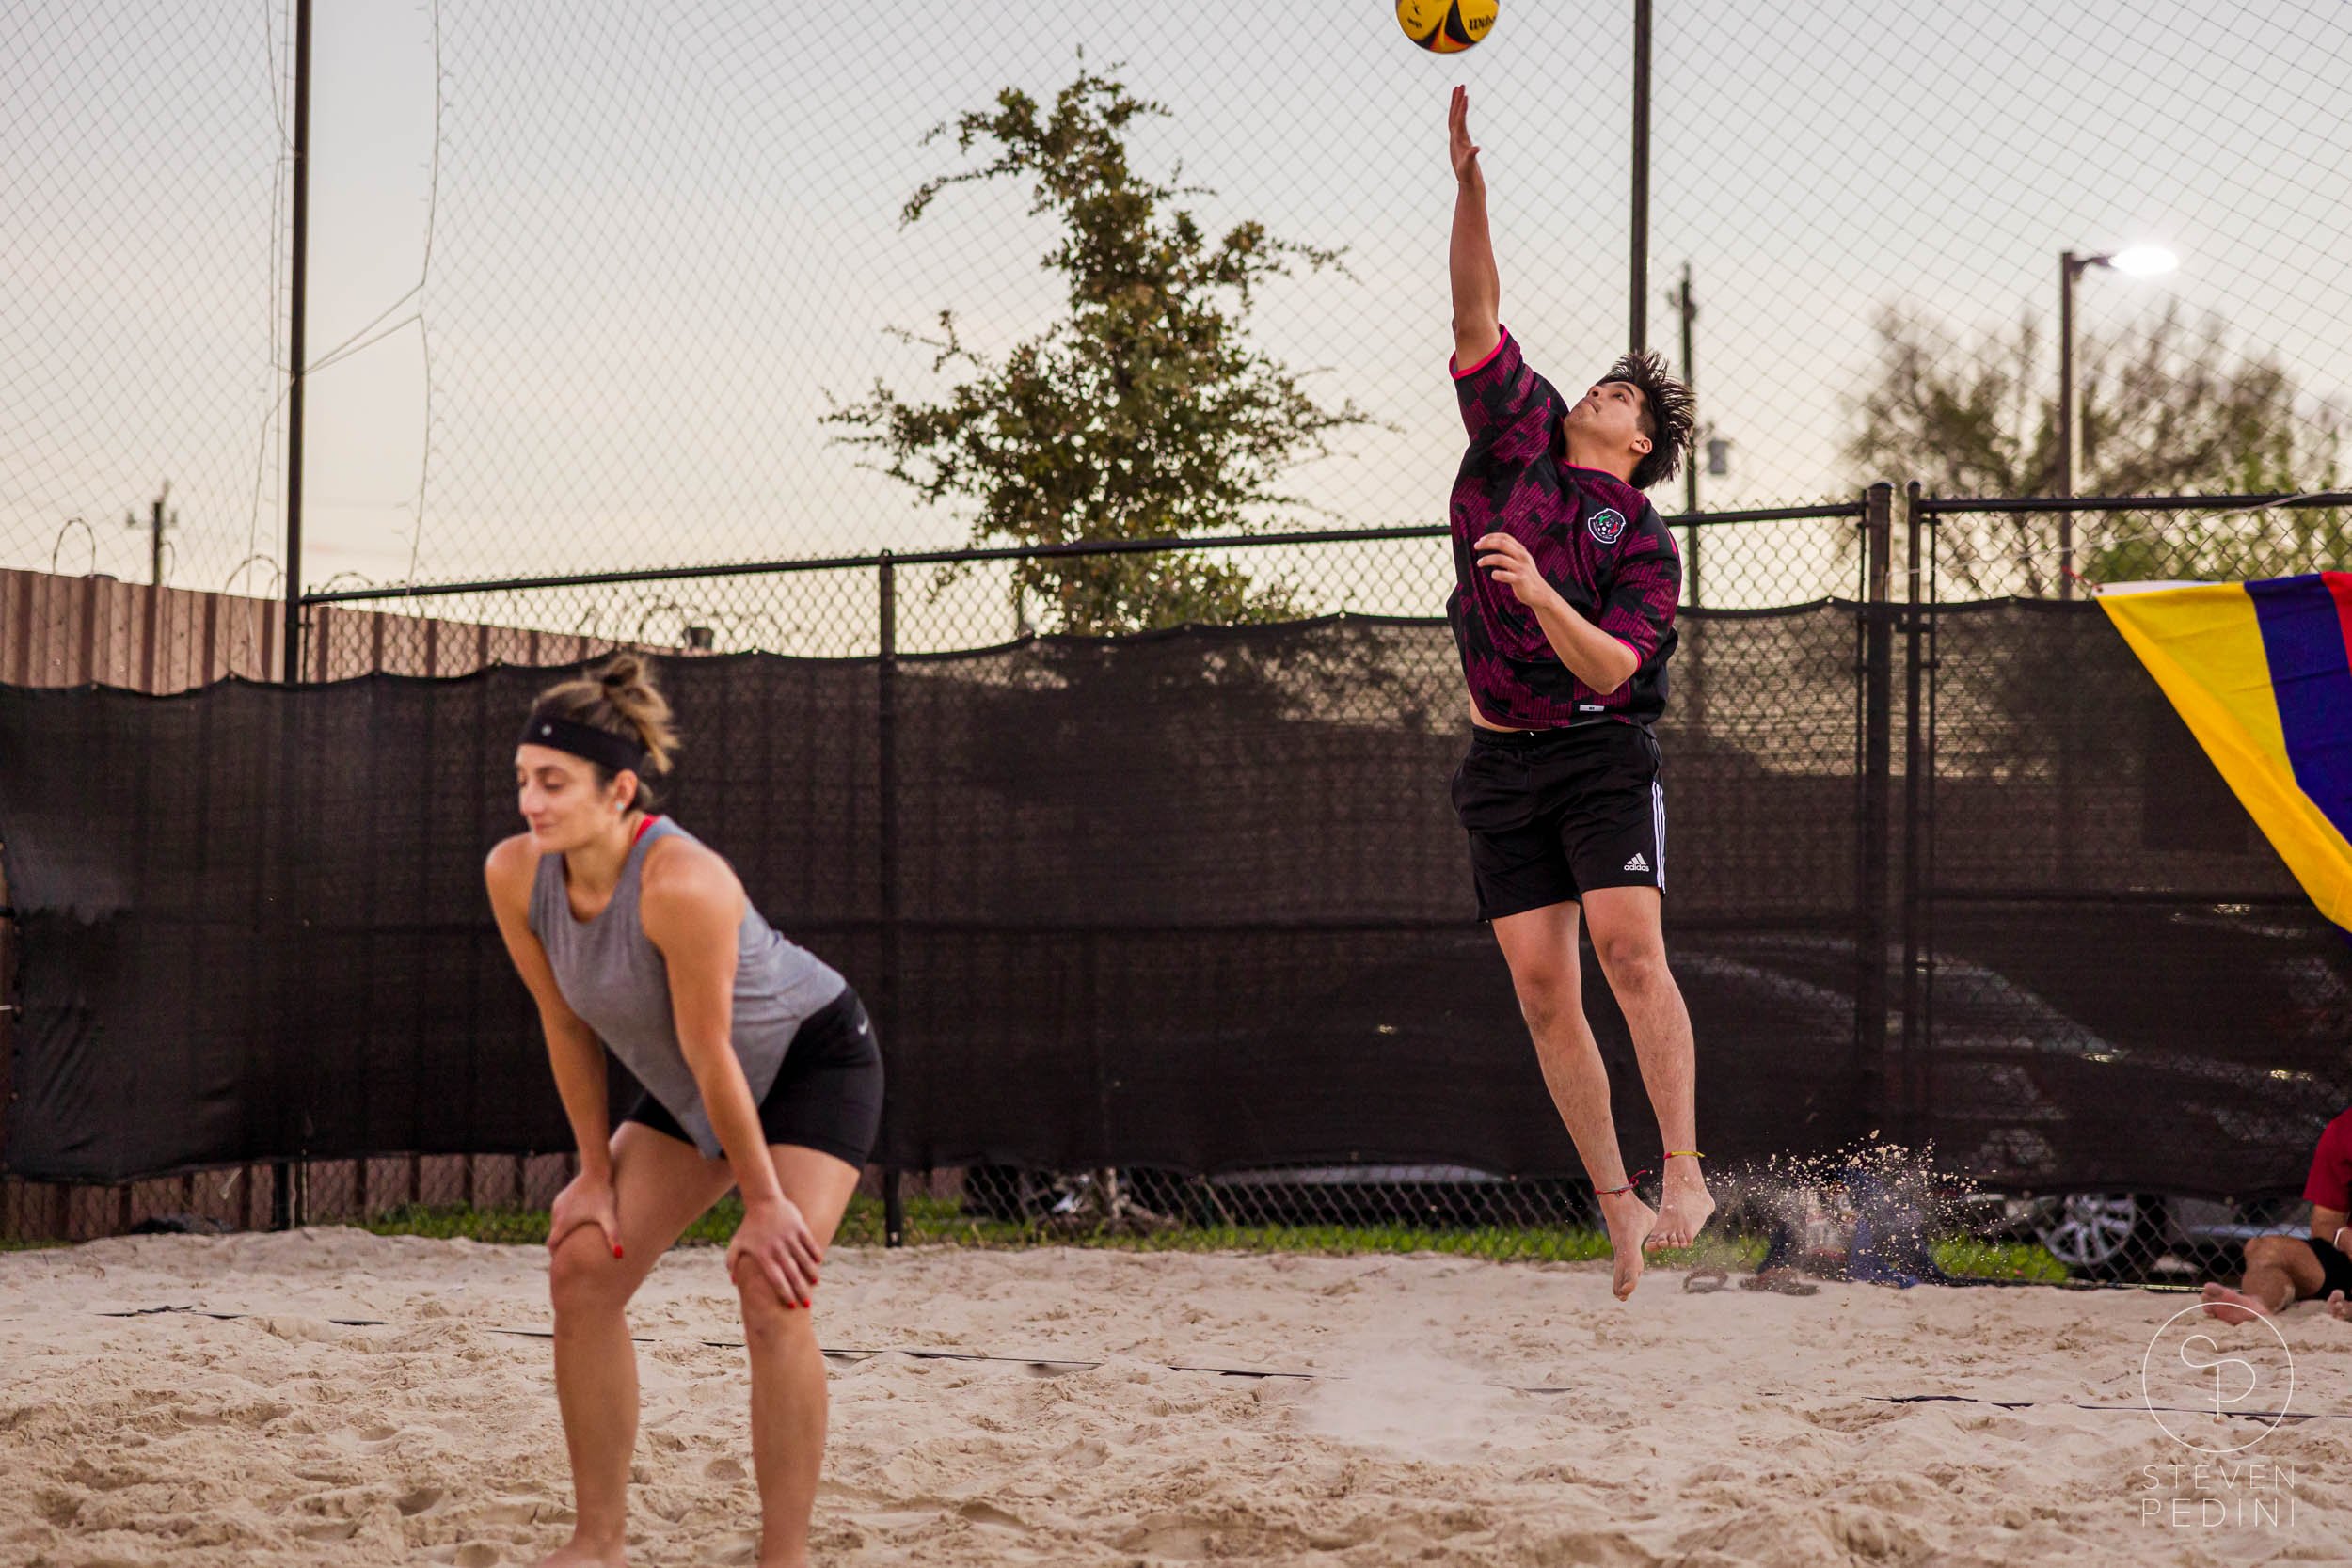 Steven Pedini Photography - Bumpy Pickle - Sand Volleyball - Houston TX - World Cup of Volleyball - 00241.jpg